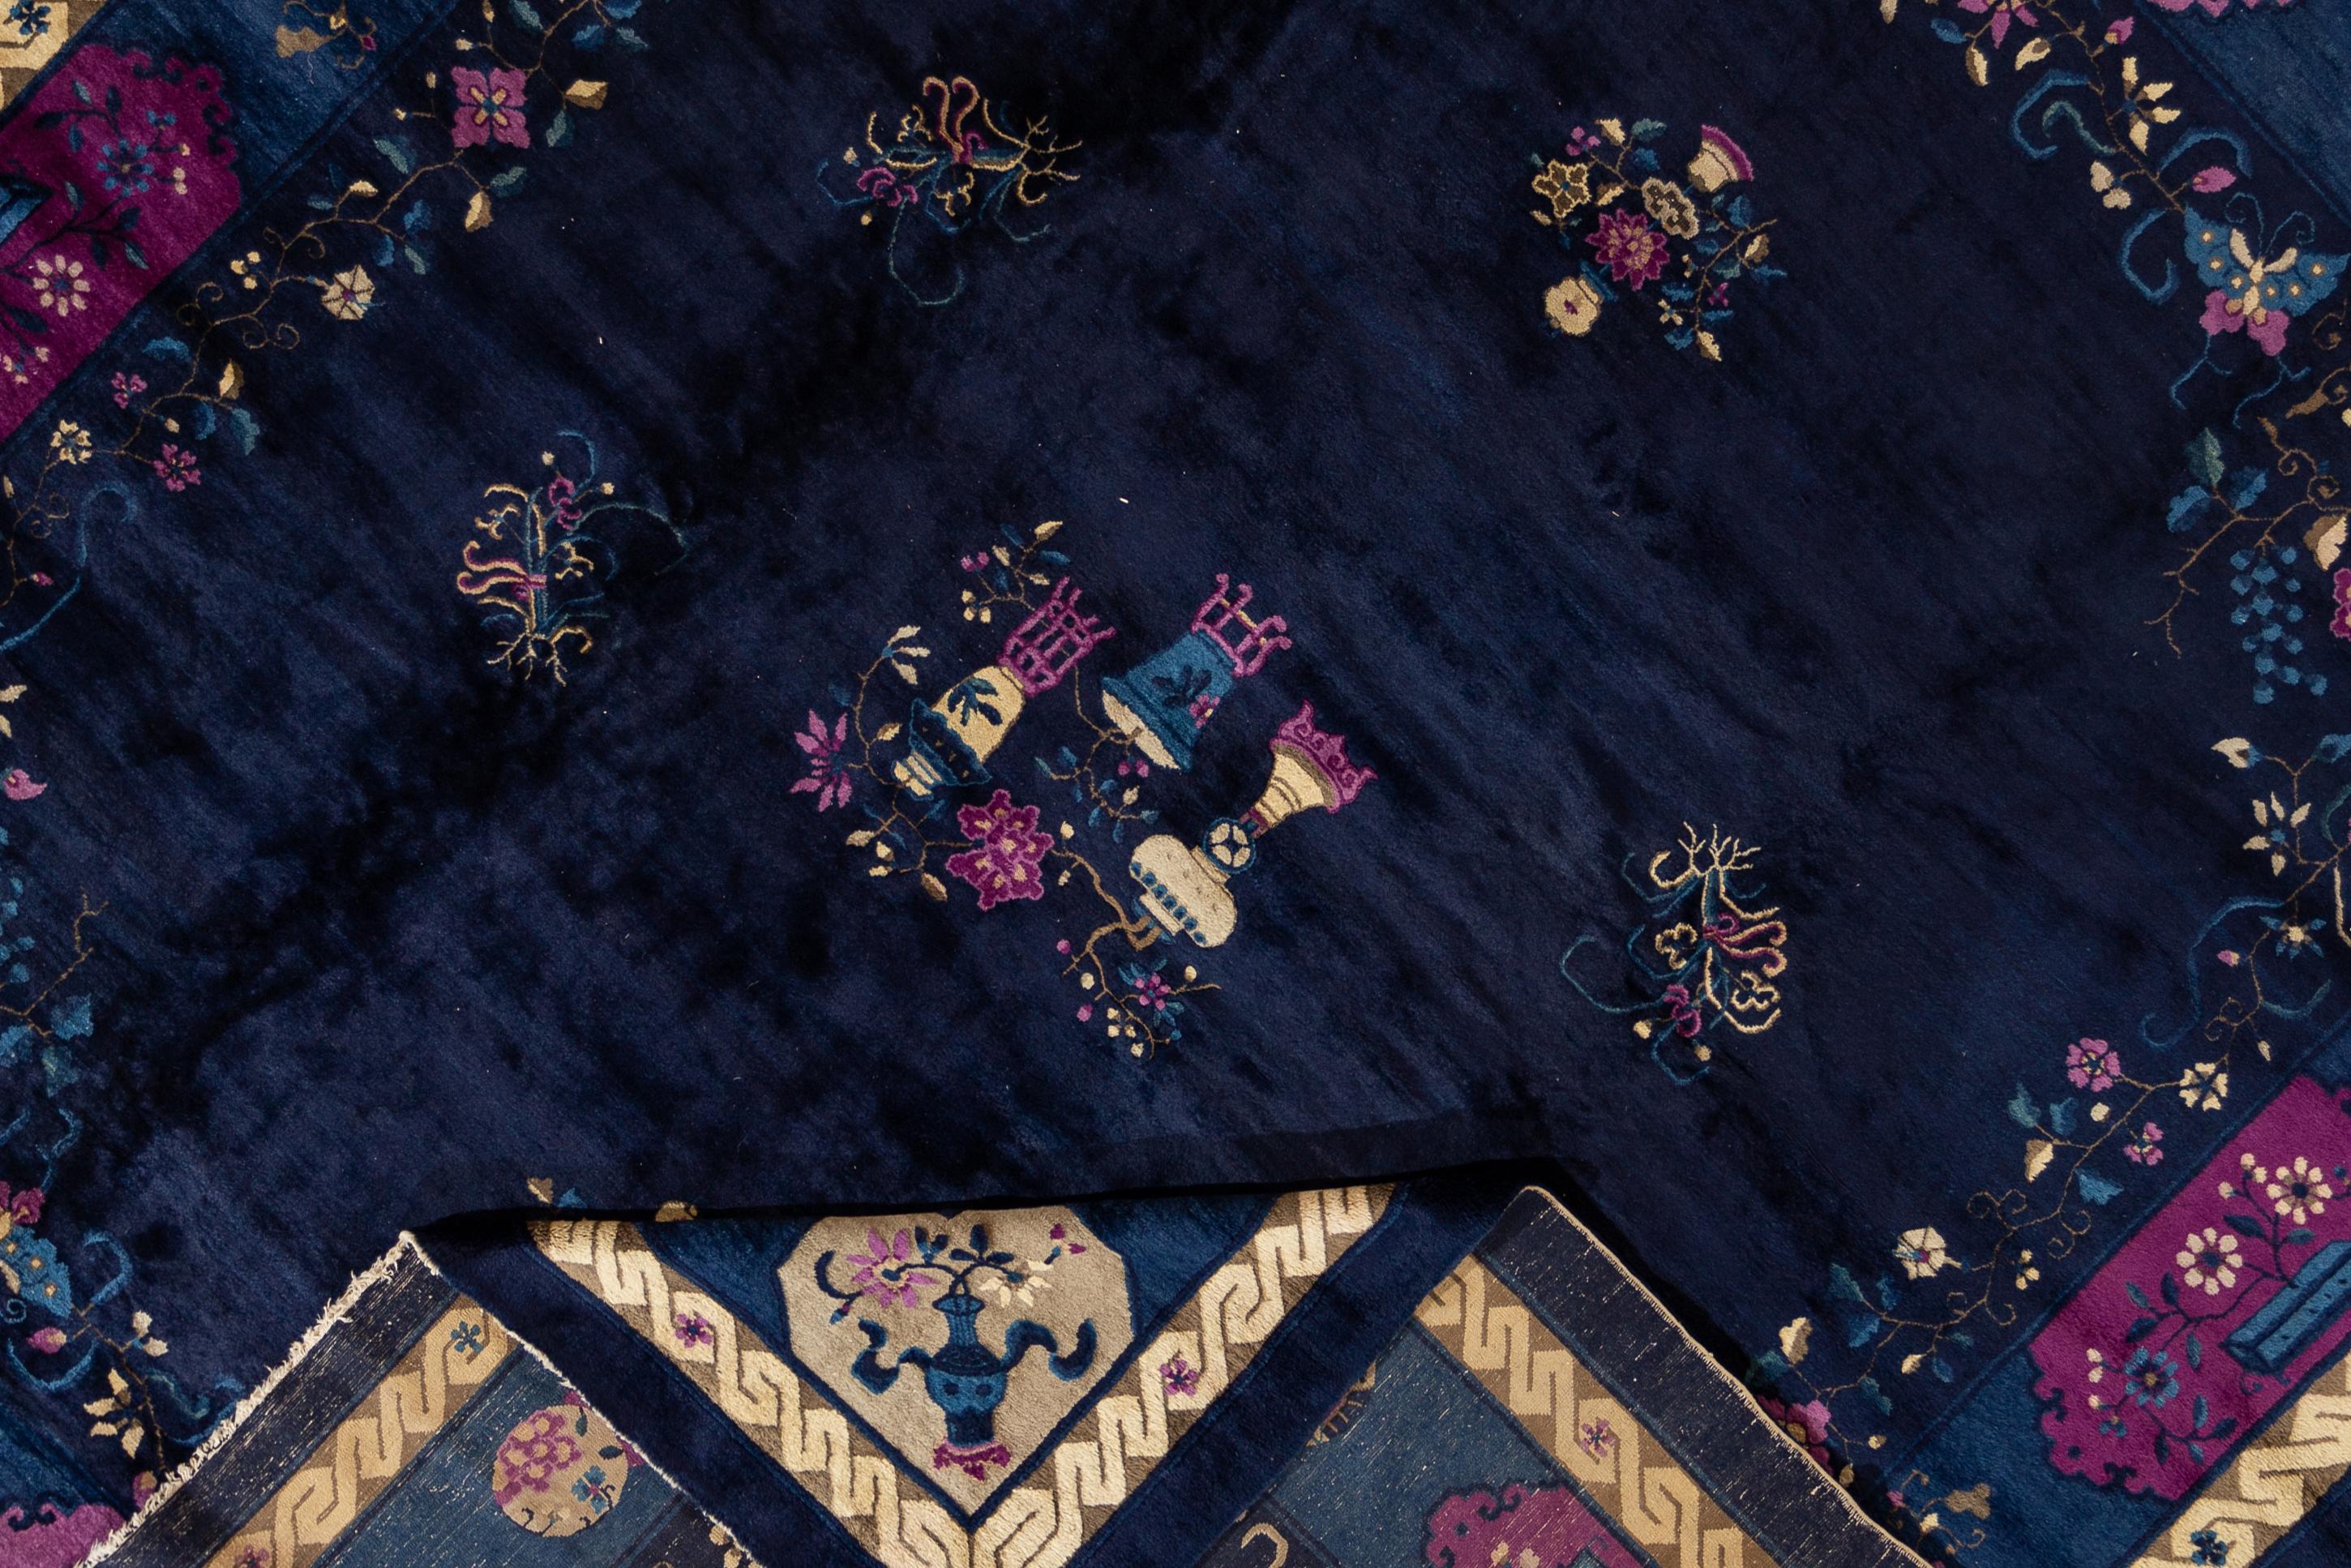 Beautiful Antique Chinese Art Deco hand-knotted wool Rug, with an indigo field,  in an allover Classic Chinese floral design.

This rug measures 10'8